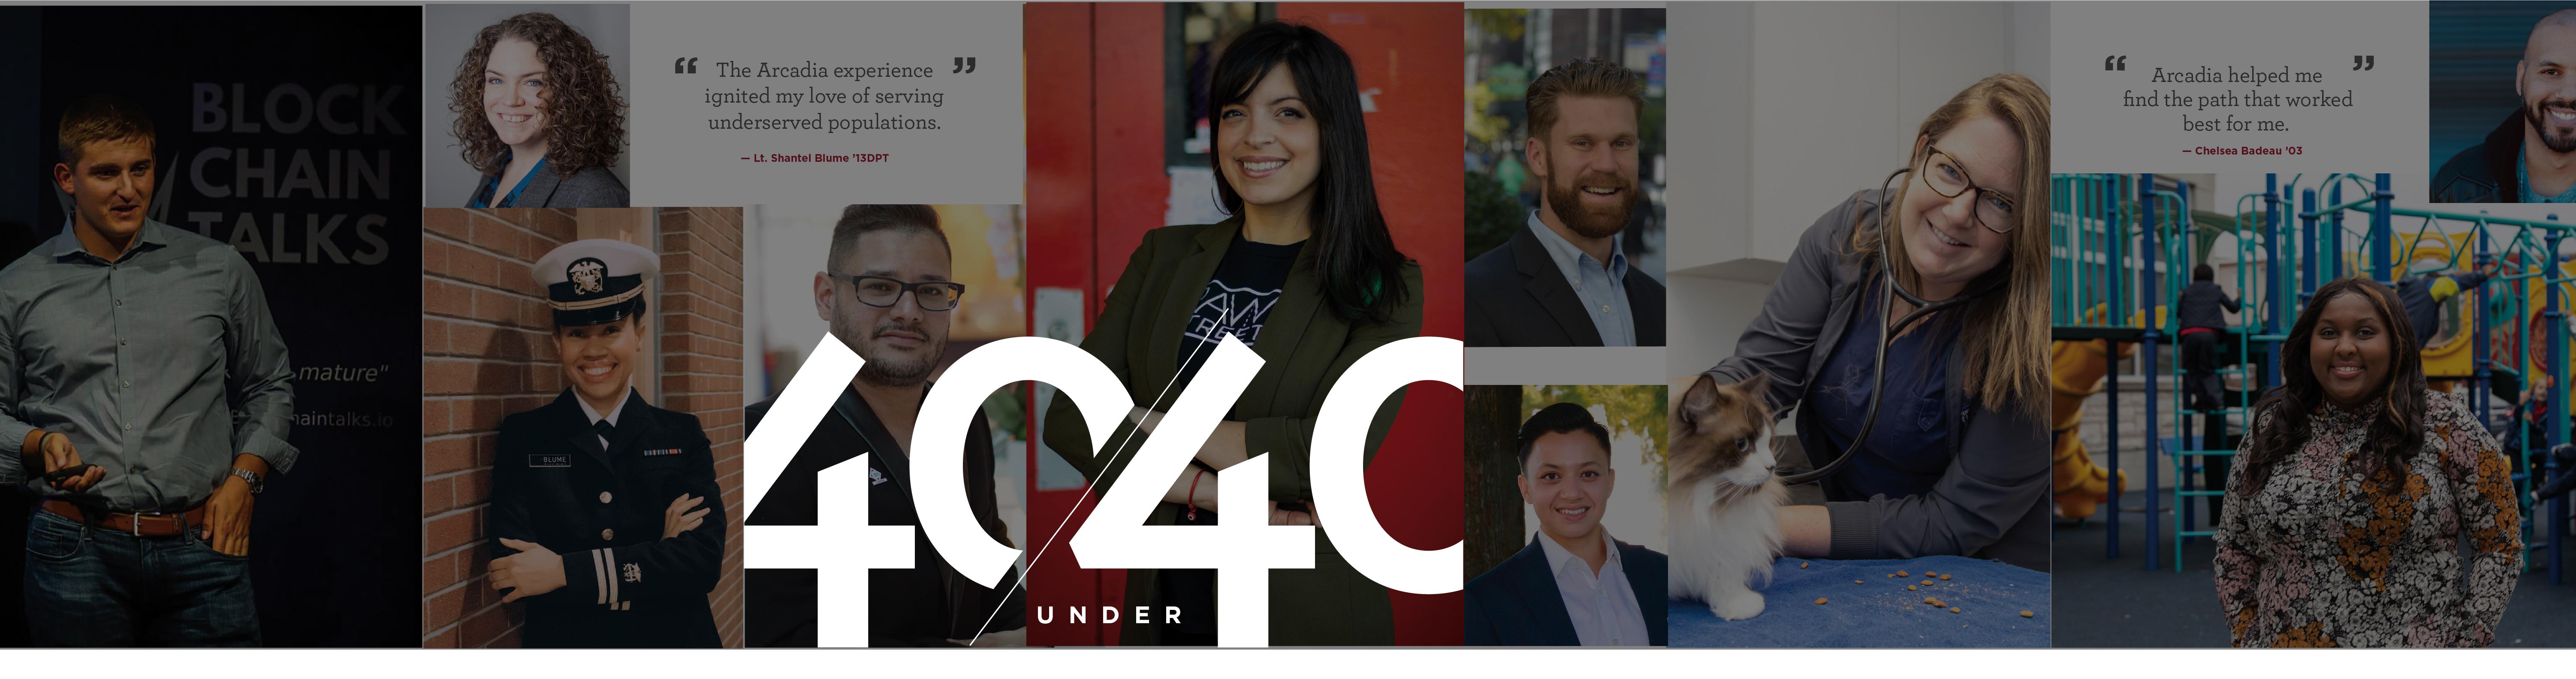 Collage of the 40 under 40 members.